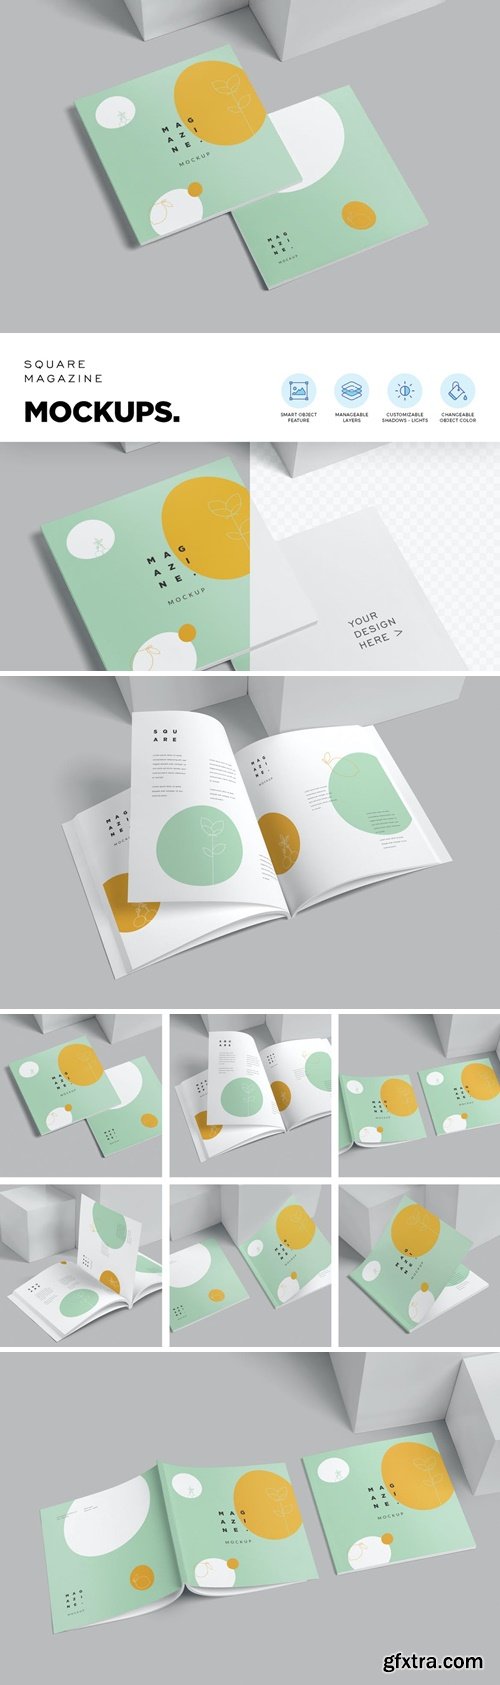 Square Magazine Mockups BY2YZ4N